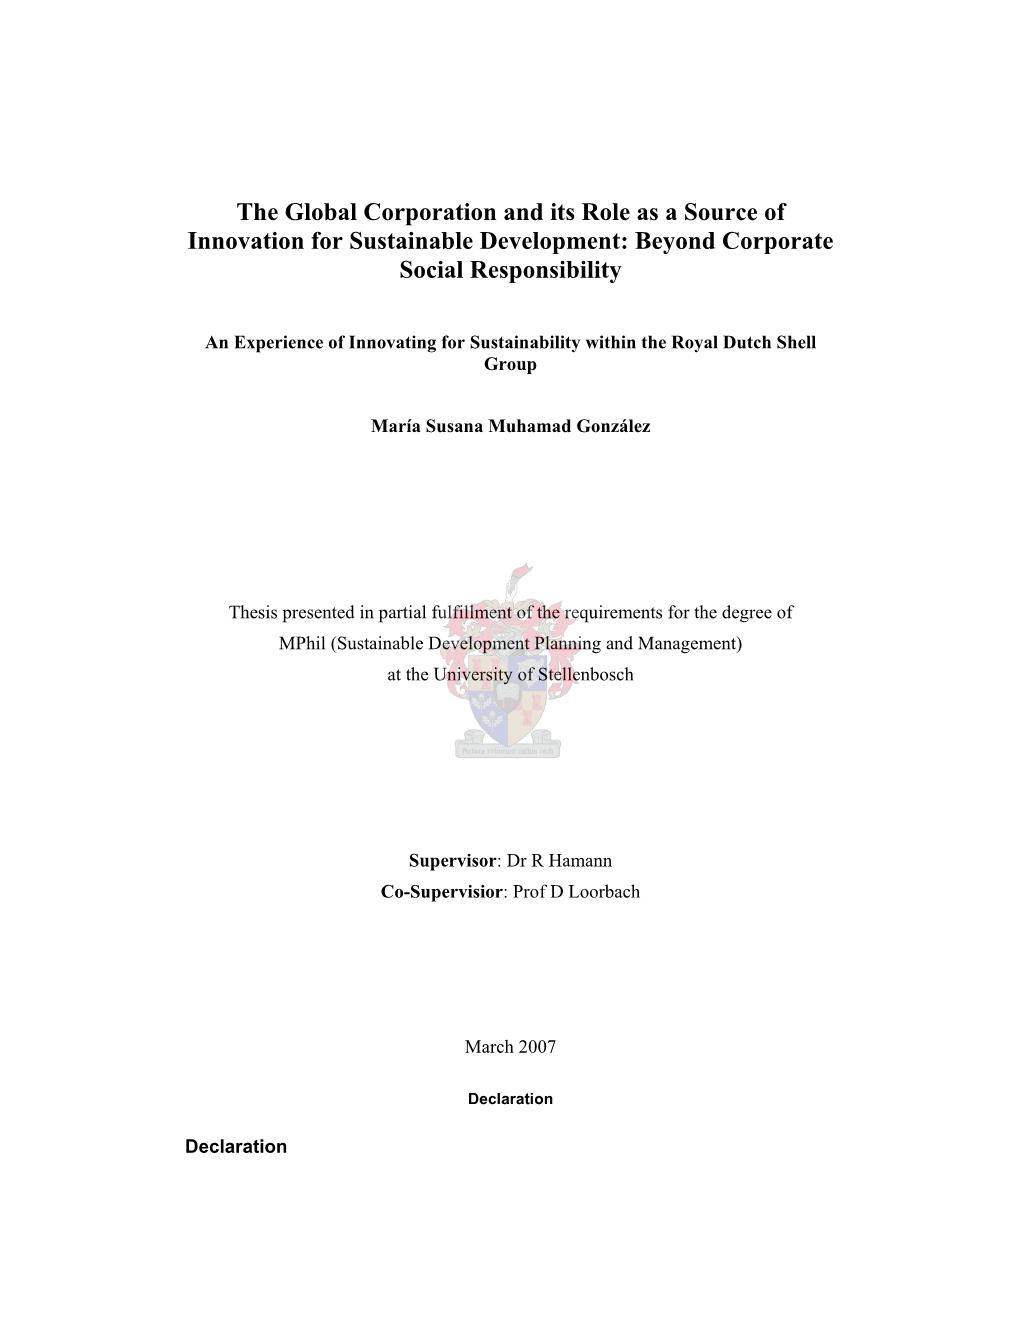 The Global Corporation and Its Role As a Source of Innovation for Sustainable Development: Beyond Corporate Social Responsibility